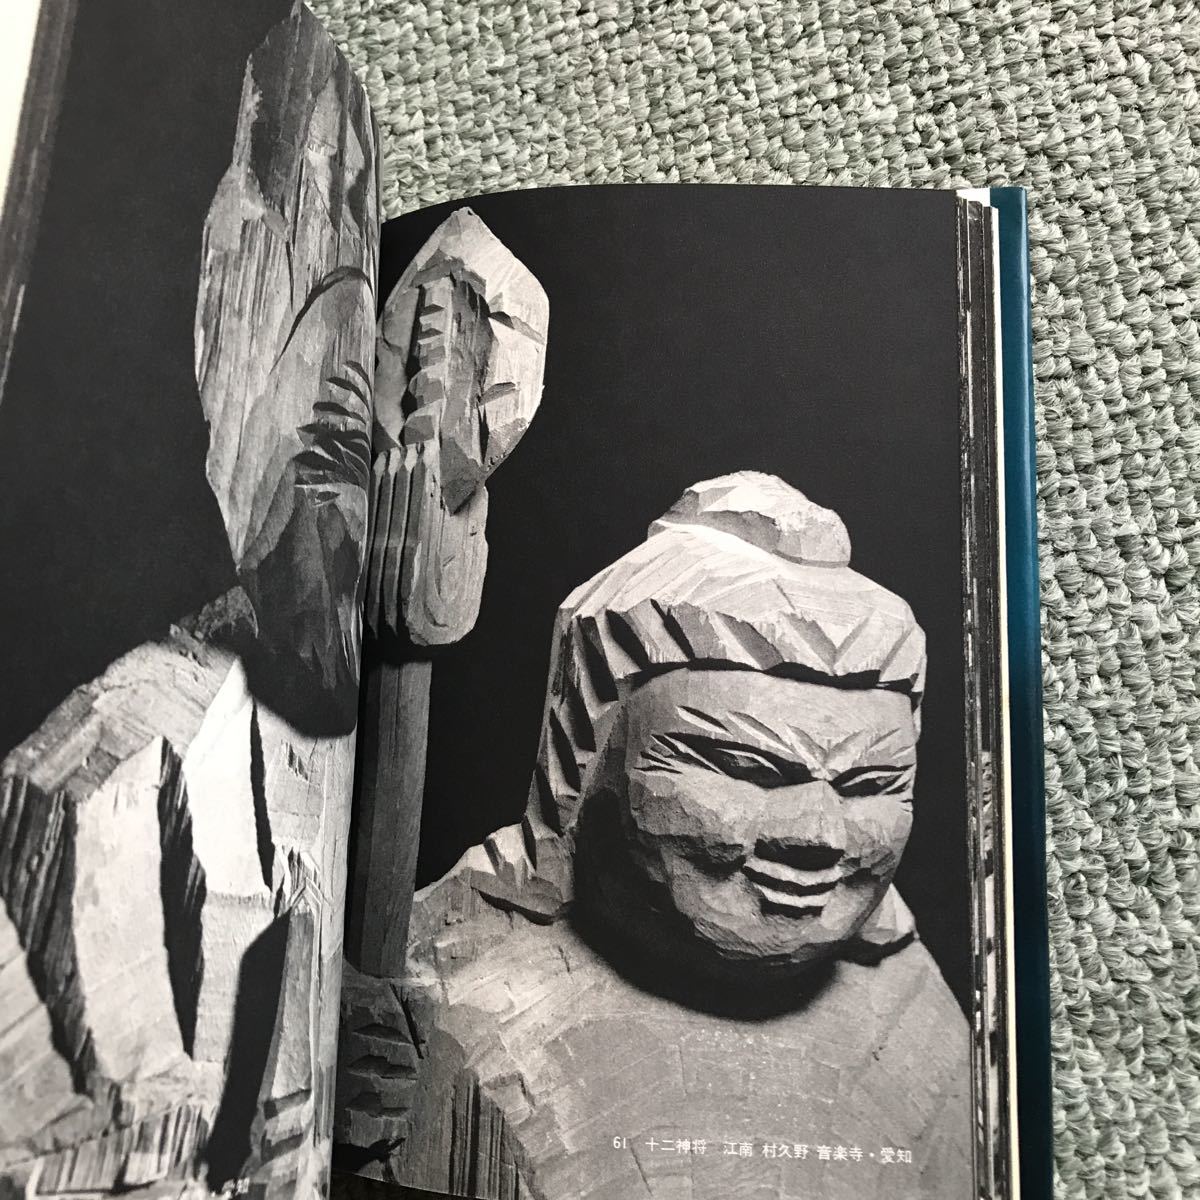  jpy empty .... work book@ tree carving Buddhist image sculpture 